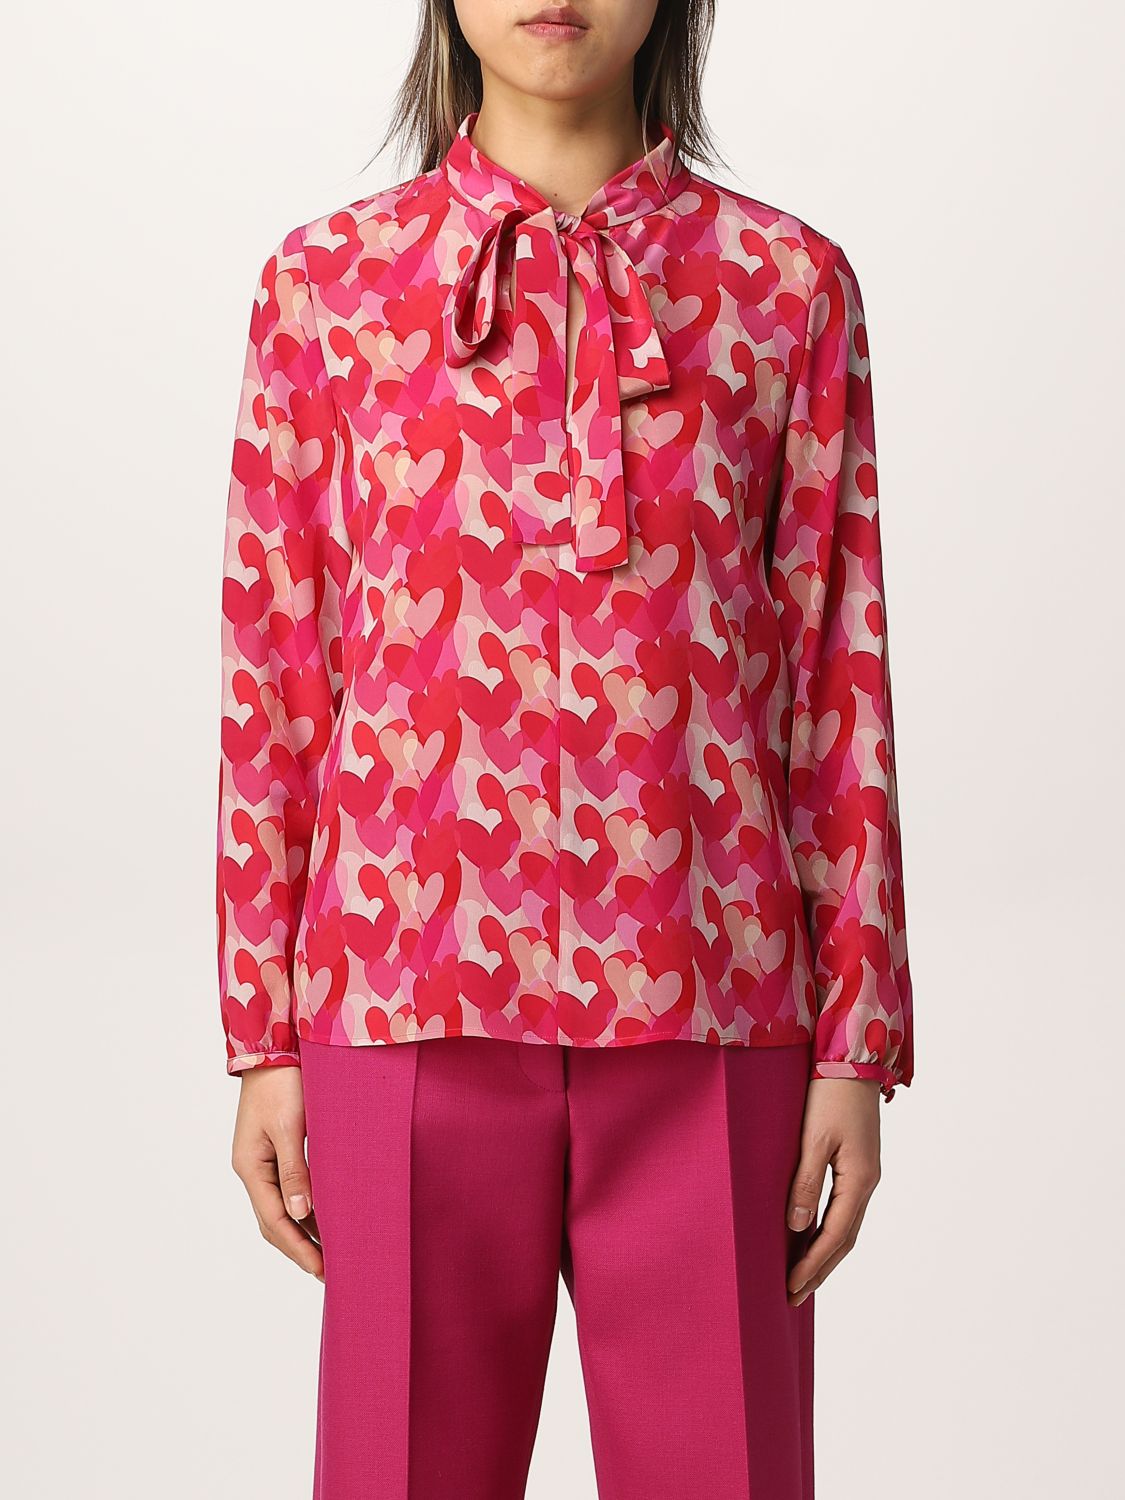 RED VALENTINO: patterned shirt - Fuchsia | Valentino shirt XR3ABB056A5 at GIGLIO.COM